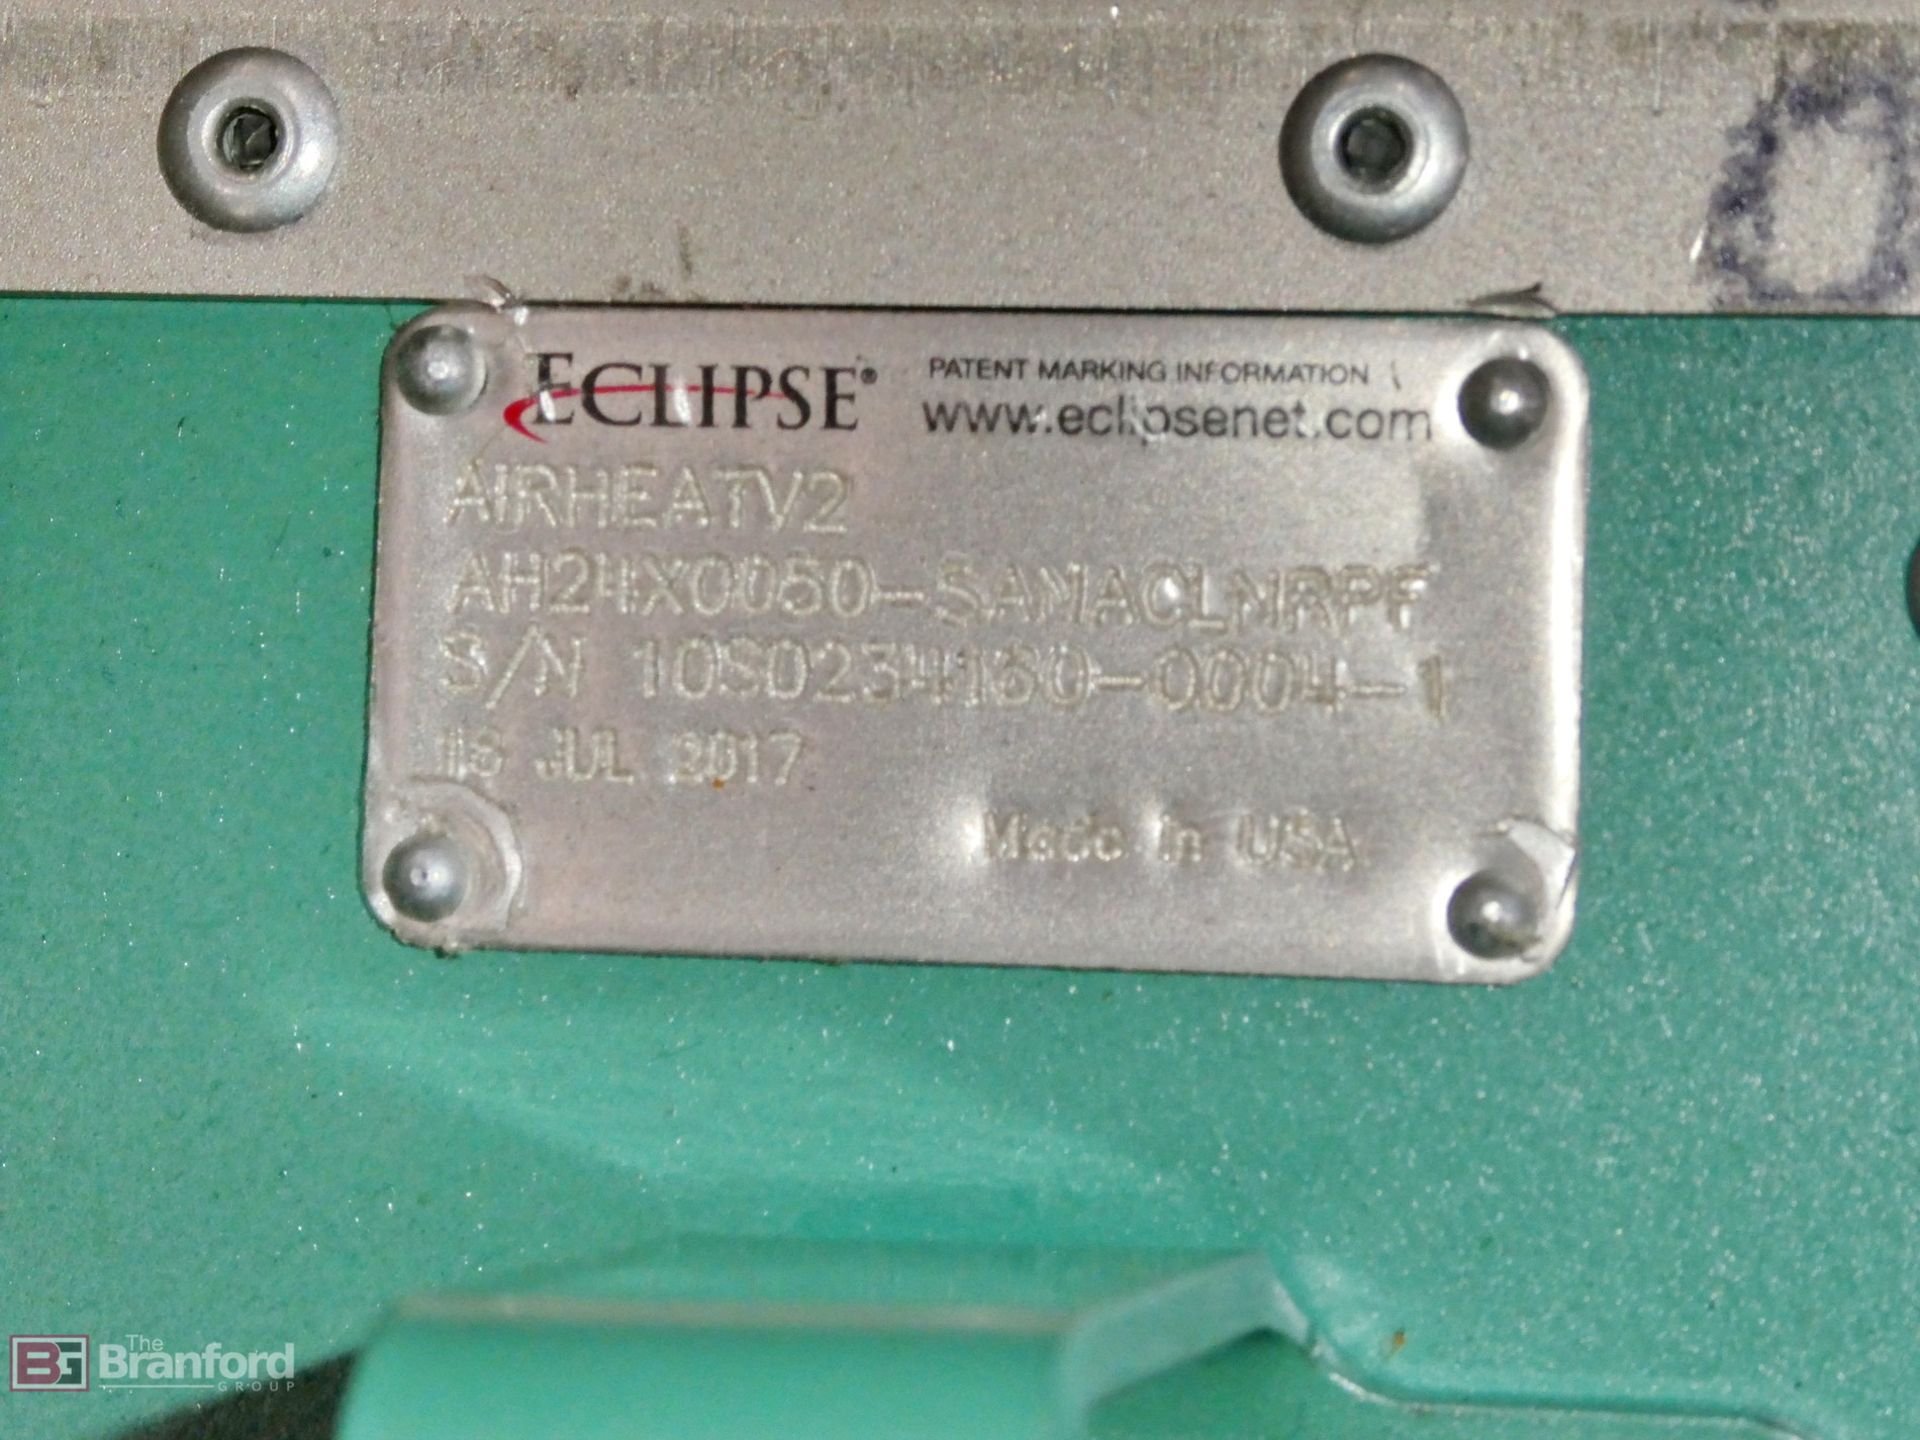 Honeywell/Eclipse Model PRA6A4BD, Programmable Rotary Actuator - Image 5 of 6